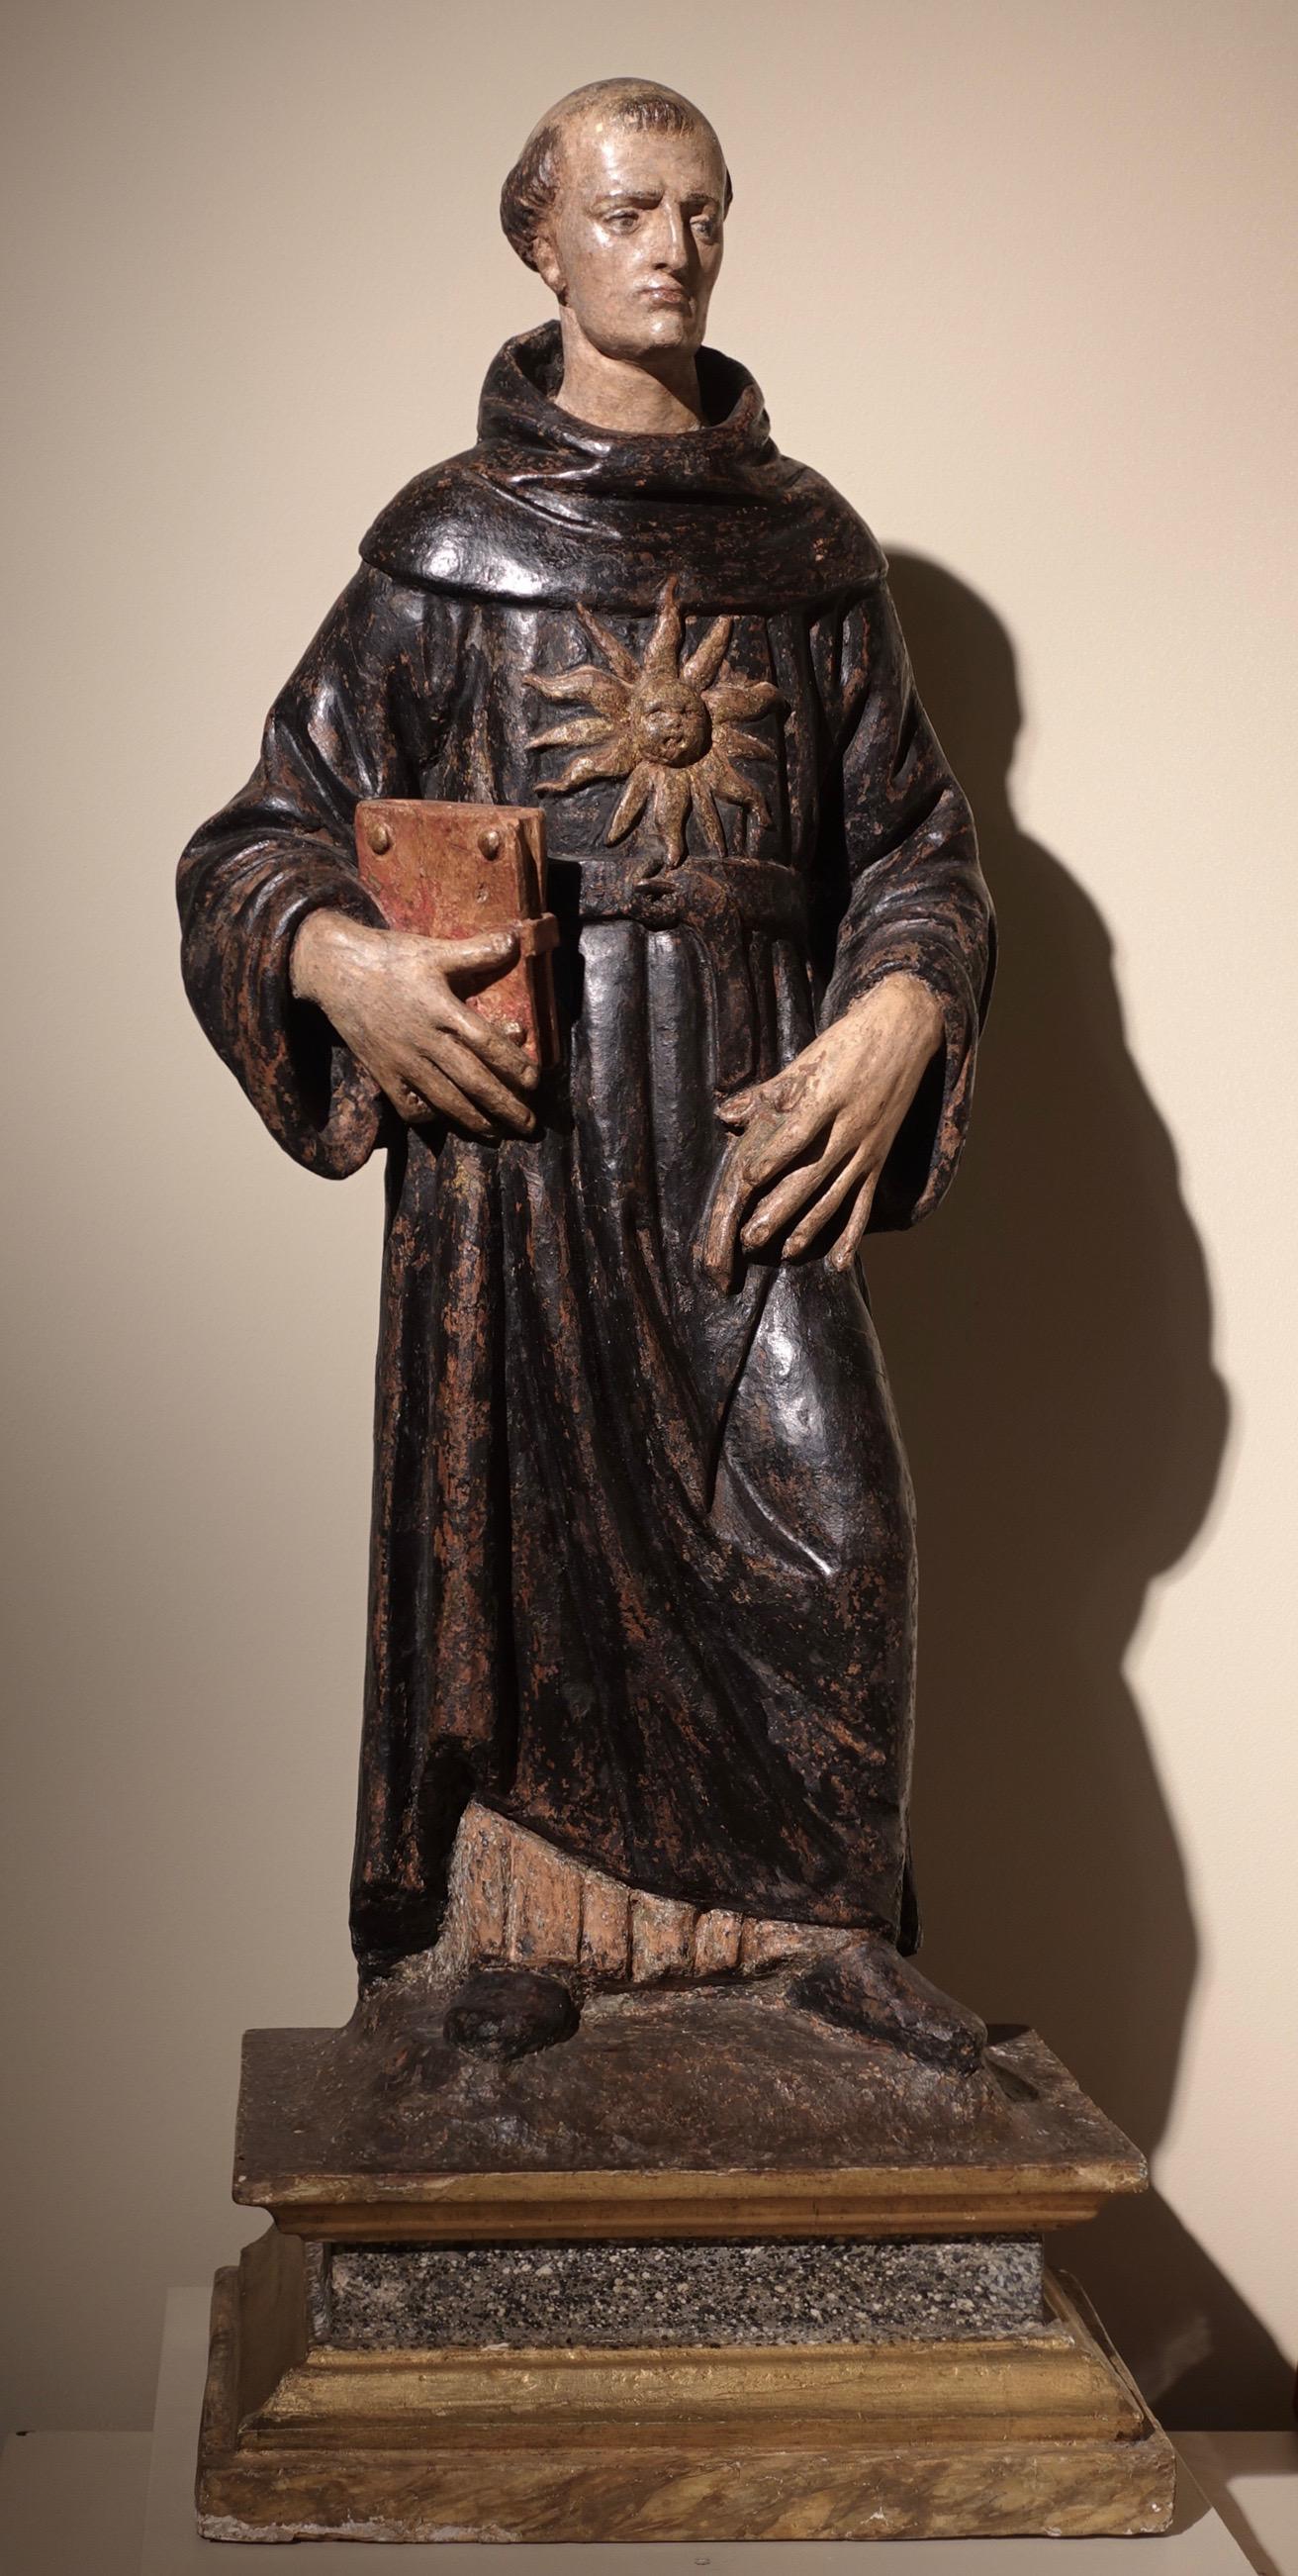 Agnolo di Polo (Firenze 1470 - Arezzo 1528)
Saint Nicholas of Tolentino
Around 1510-1520
Painted and gilded terracotta
55.5 x 24 x 16.5 cm

San Nicholas de Tolentino is represented with the black tunic decorated by a sun typical of the hermits